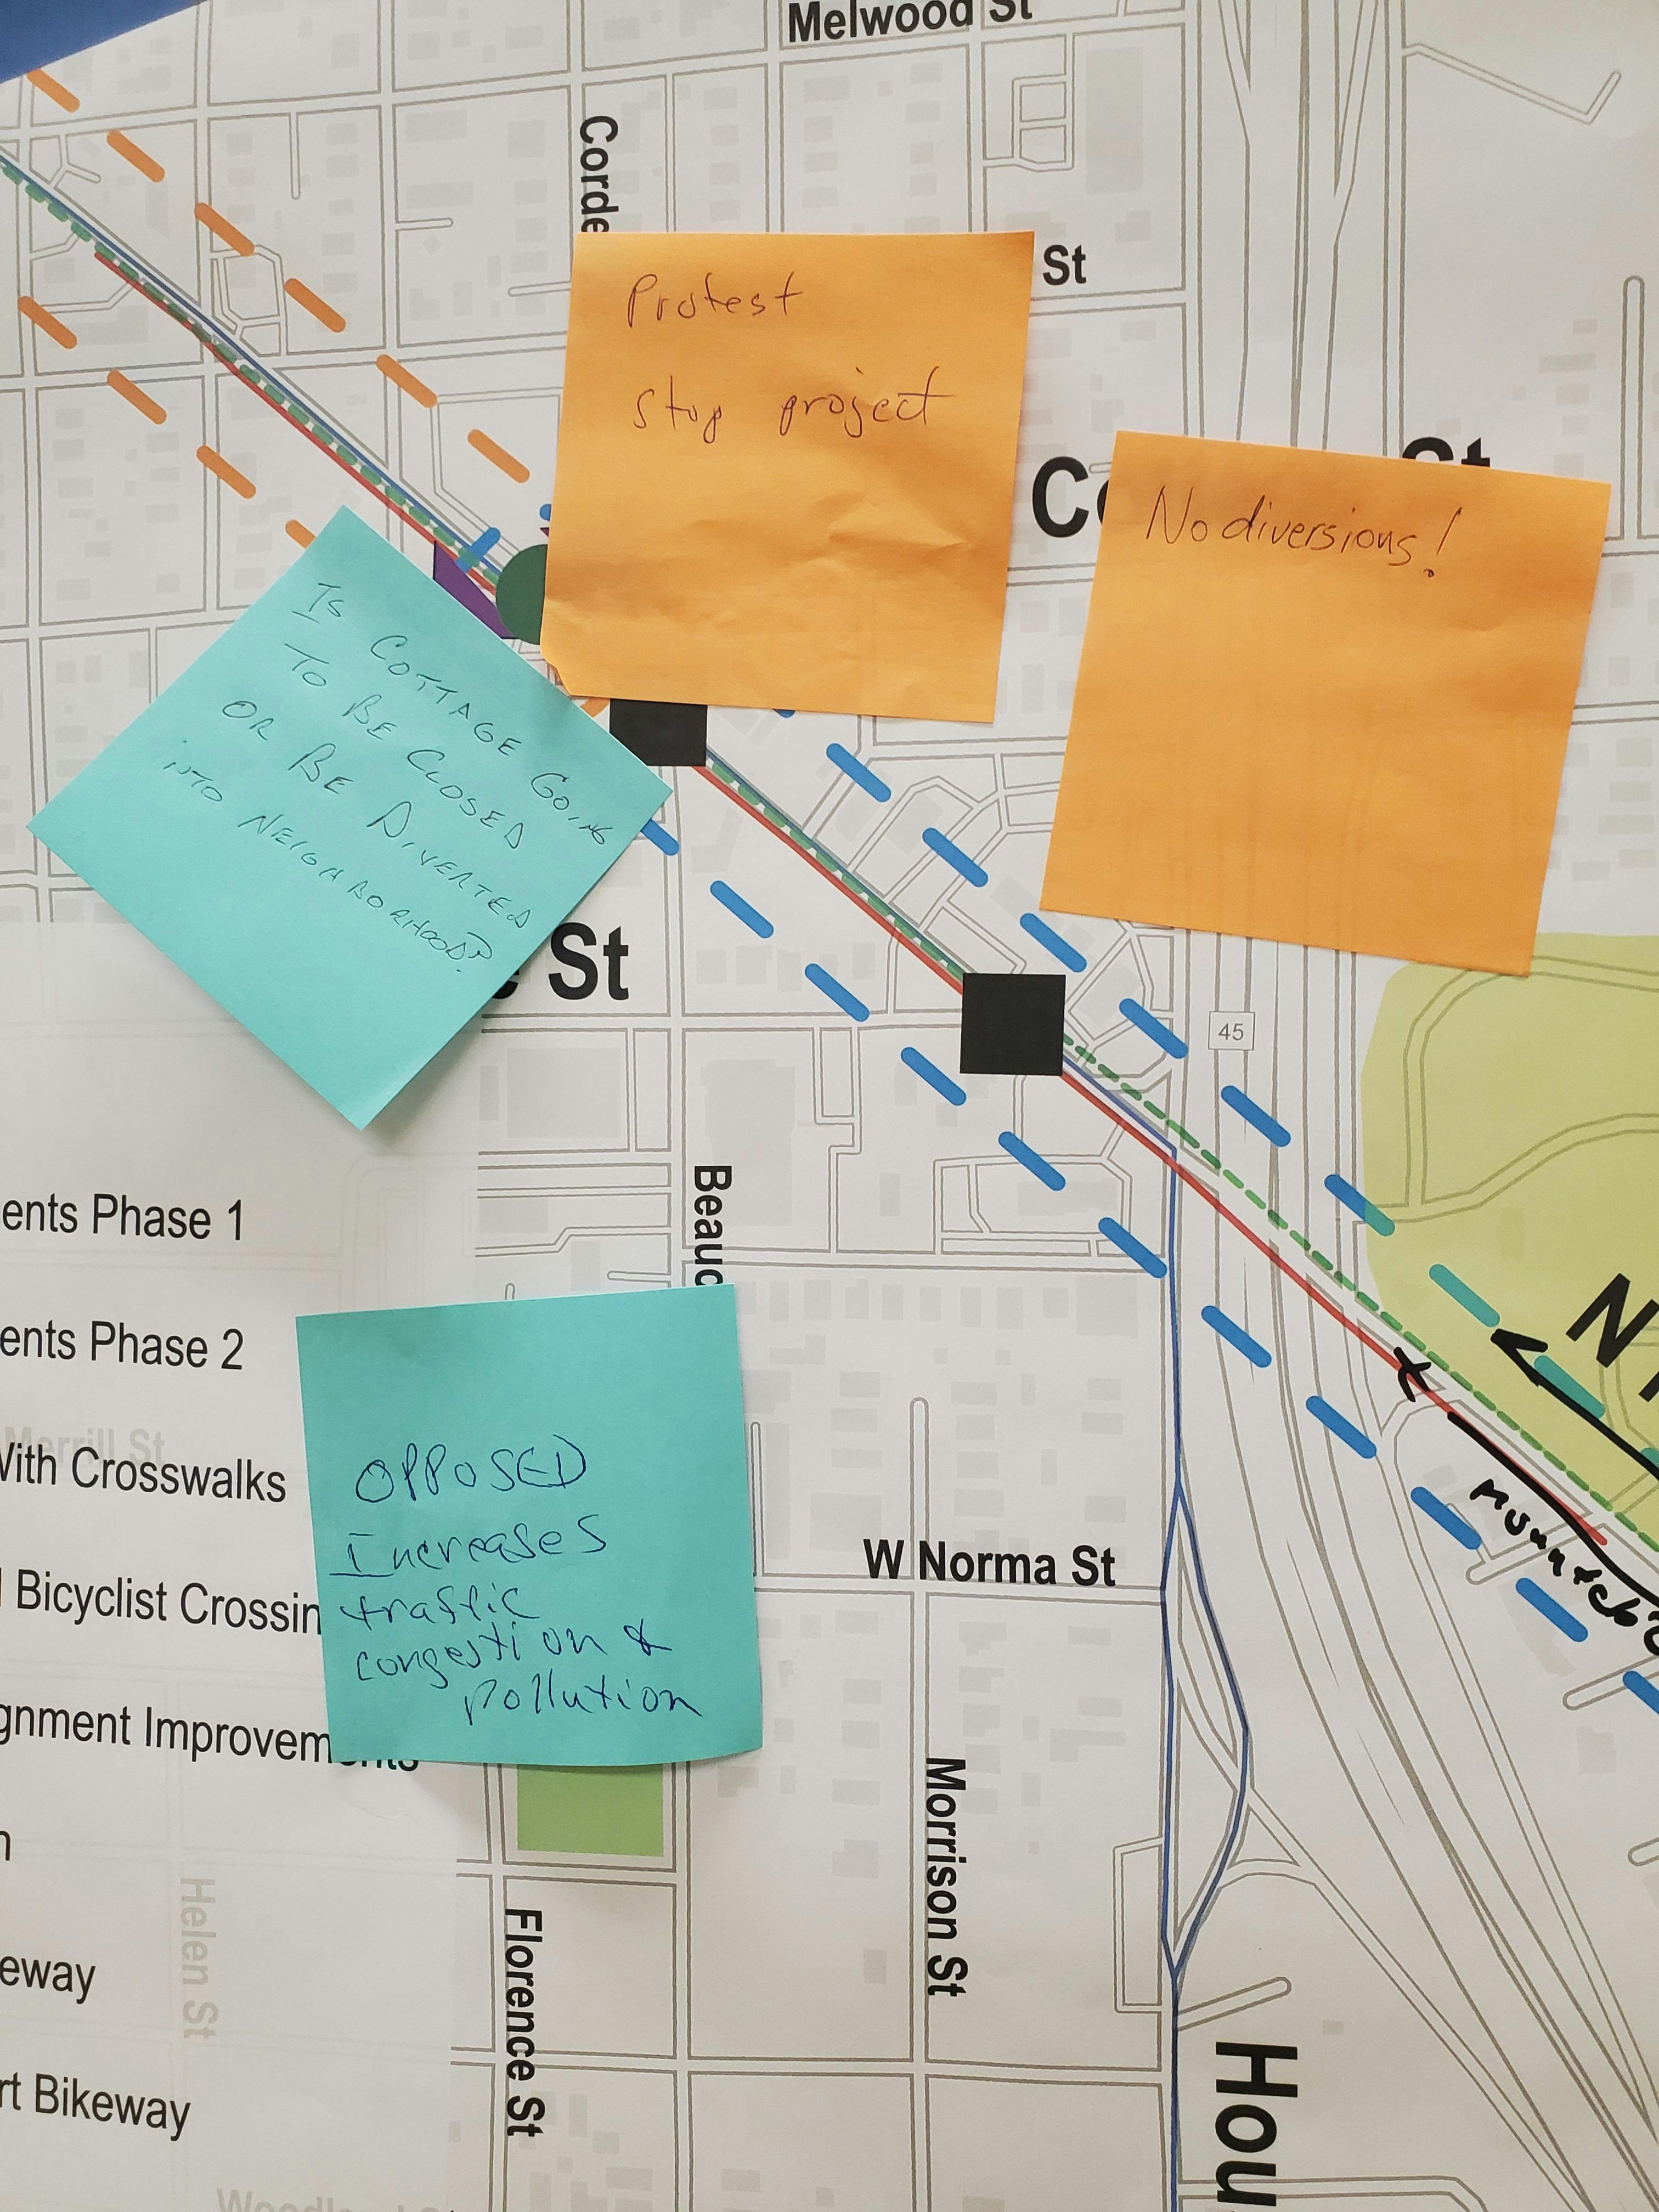 Comments on Proposed Intersection and Crossing Improvements Phase 1 Posterboard